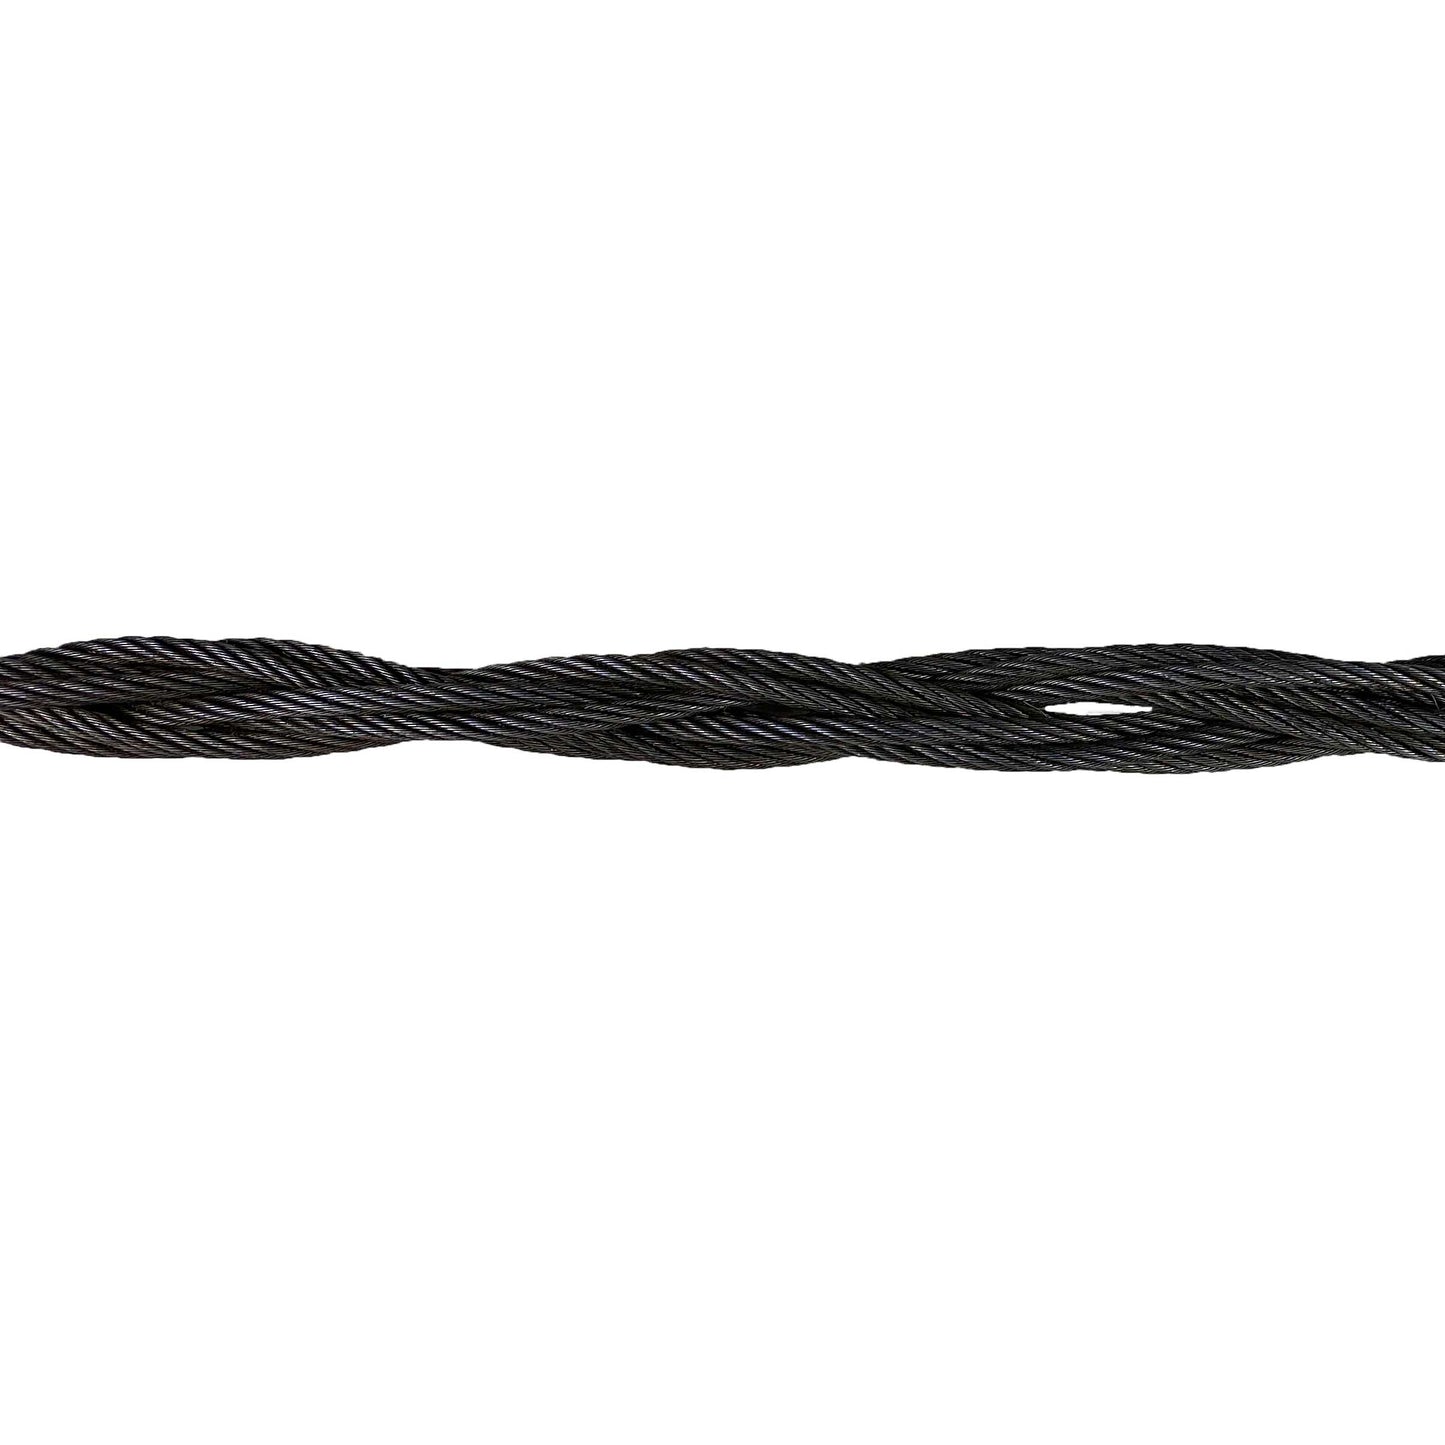 1 inch x 10 foot Eight Part Braided Wire Rope Sling image 3 of 3